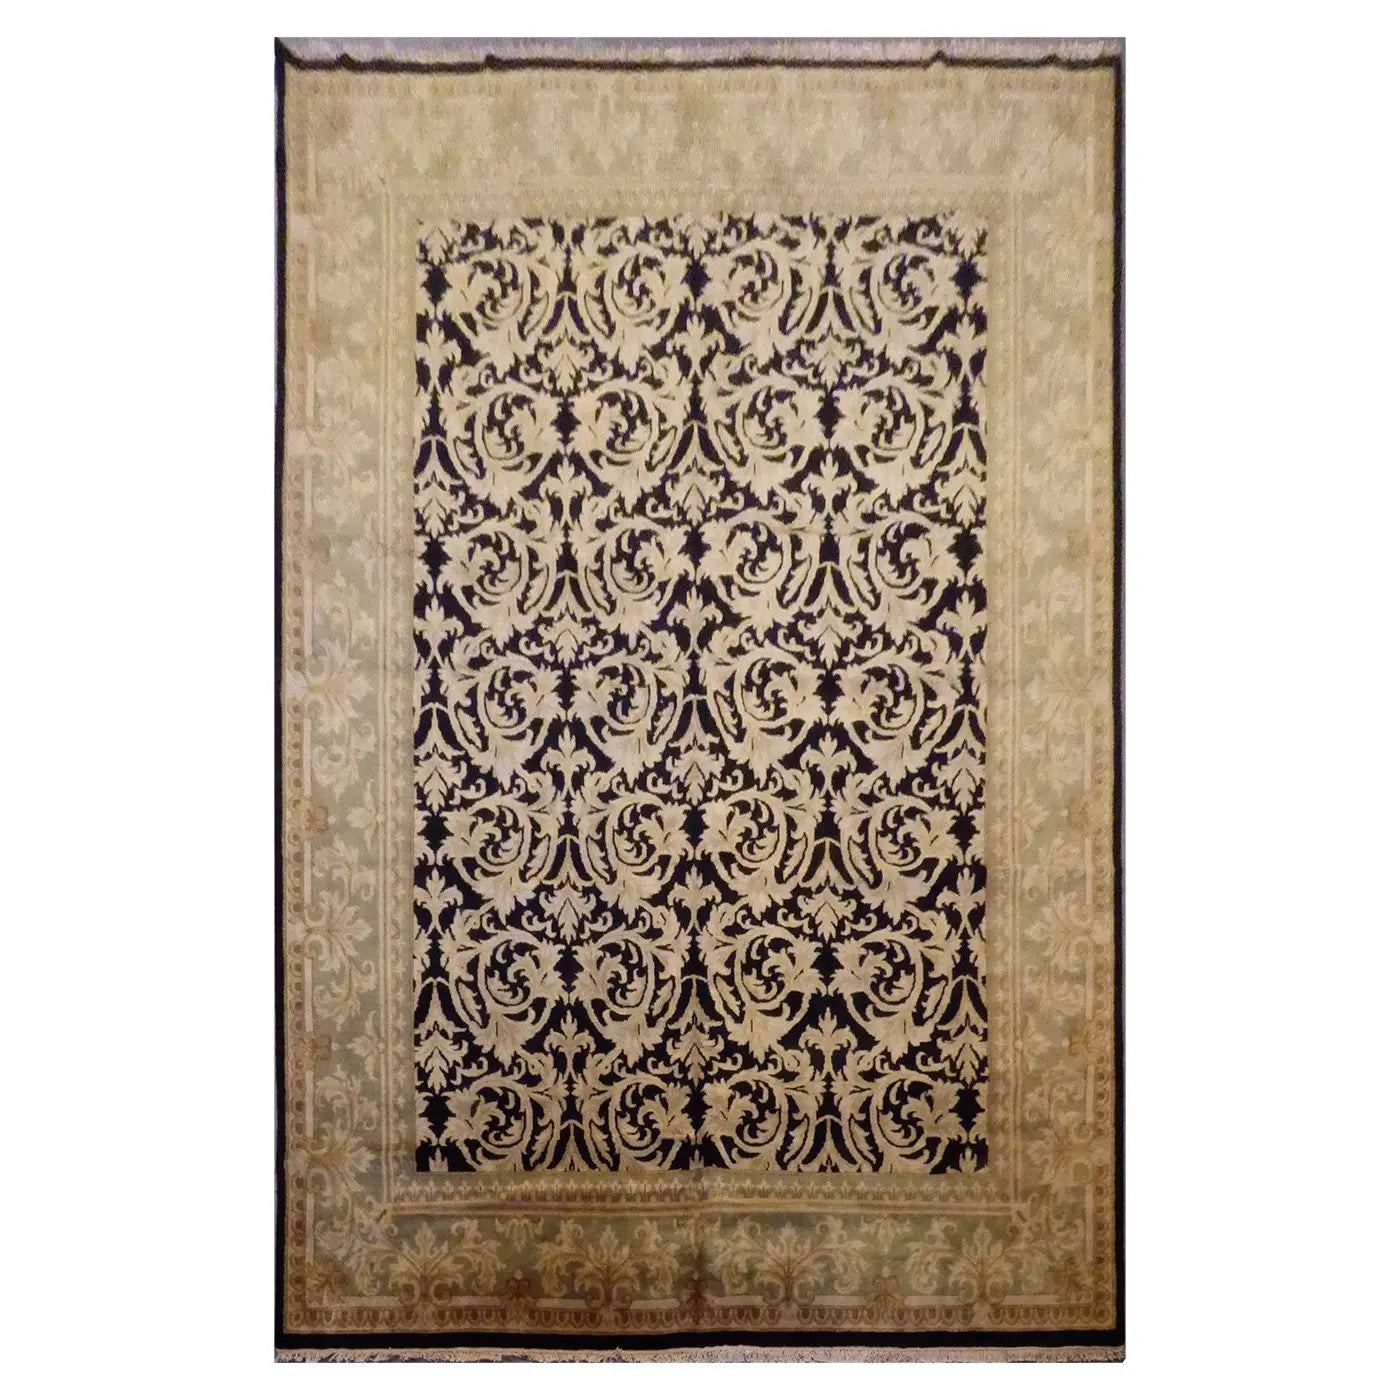 Indian Hand-Knotted Rug 14'2'' X 9'11"